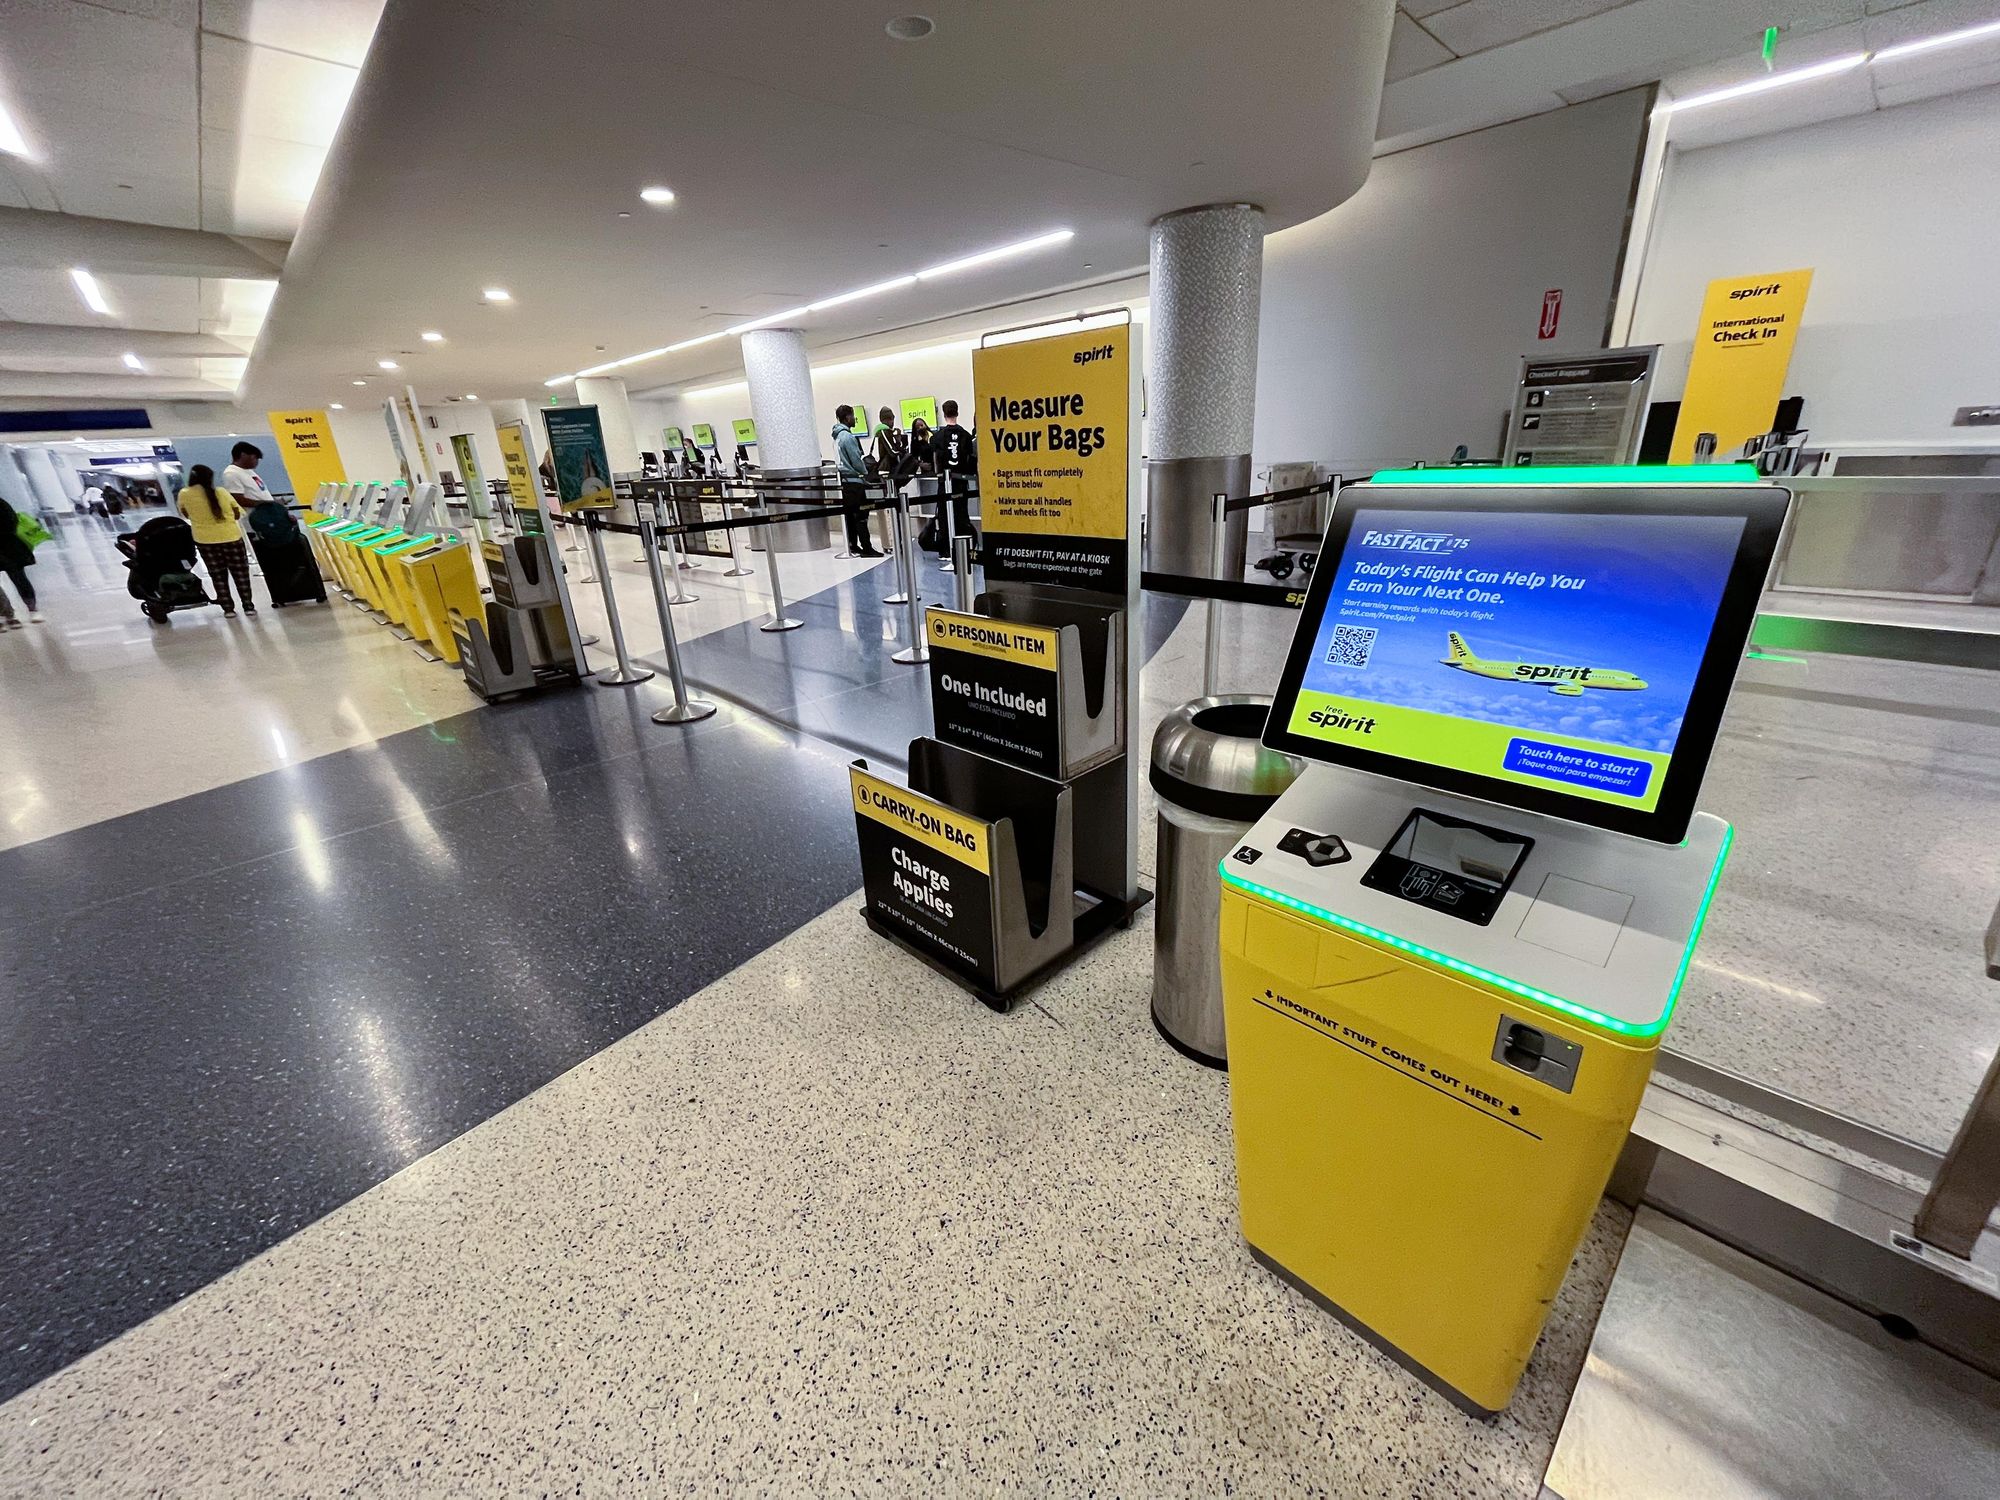 Review: LAX's Self-Bag Drop and CAT Machine Will Help You Breeze Through The Airport